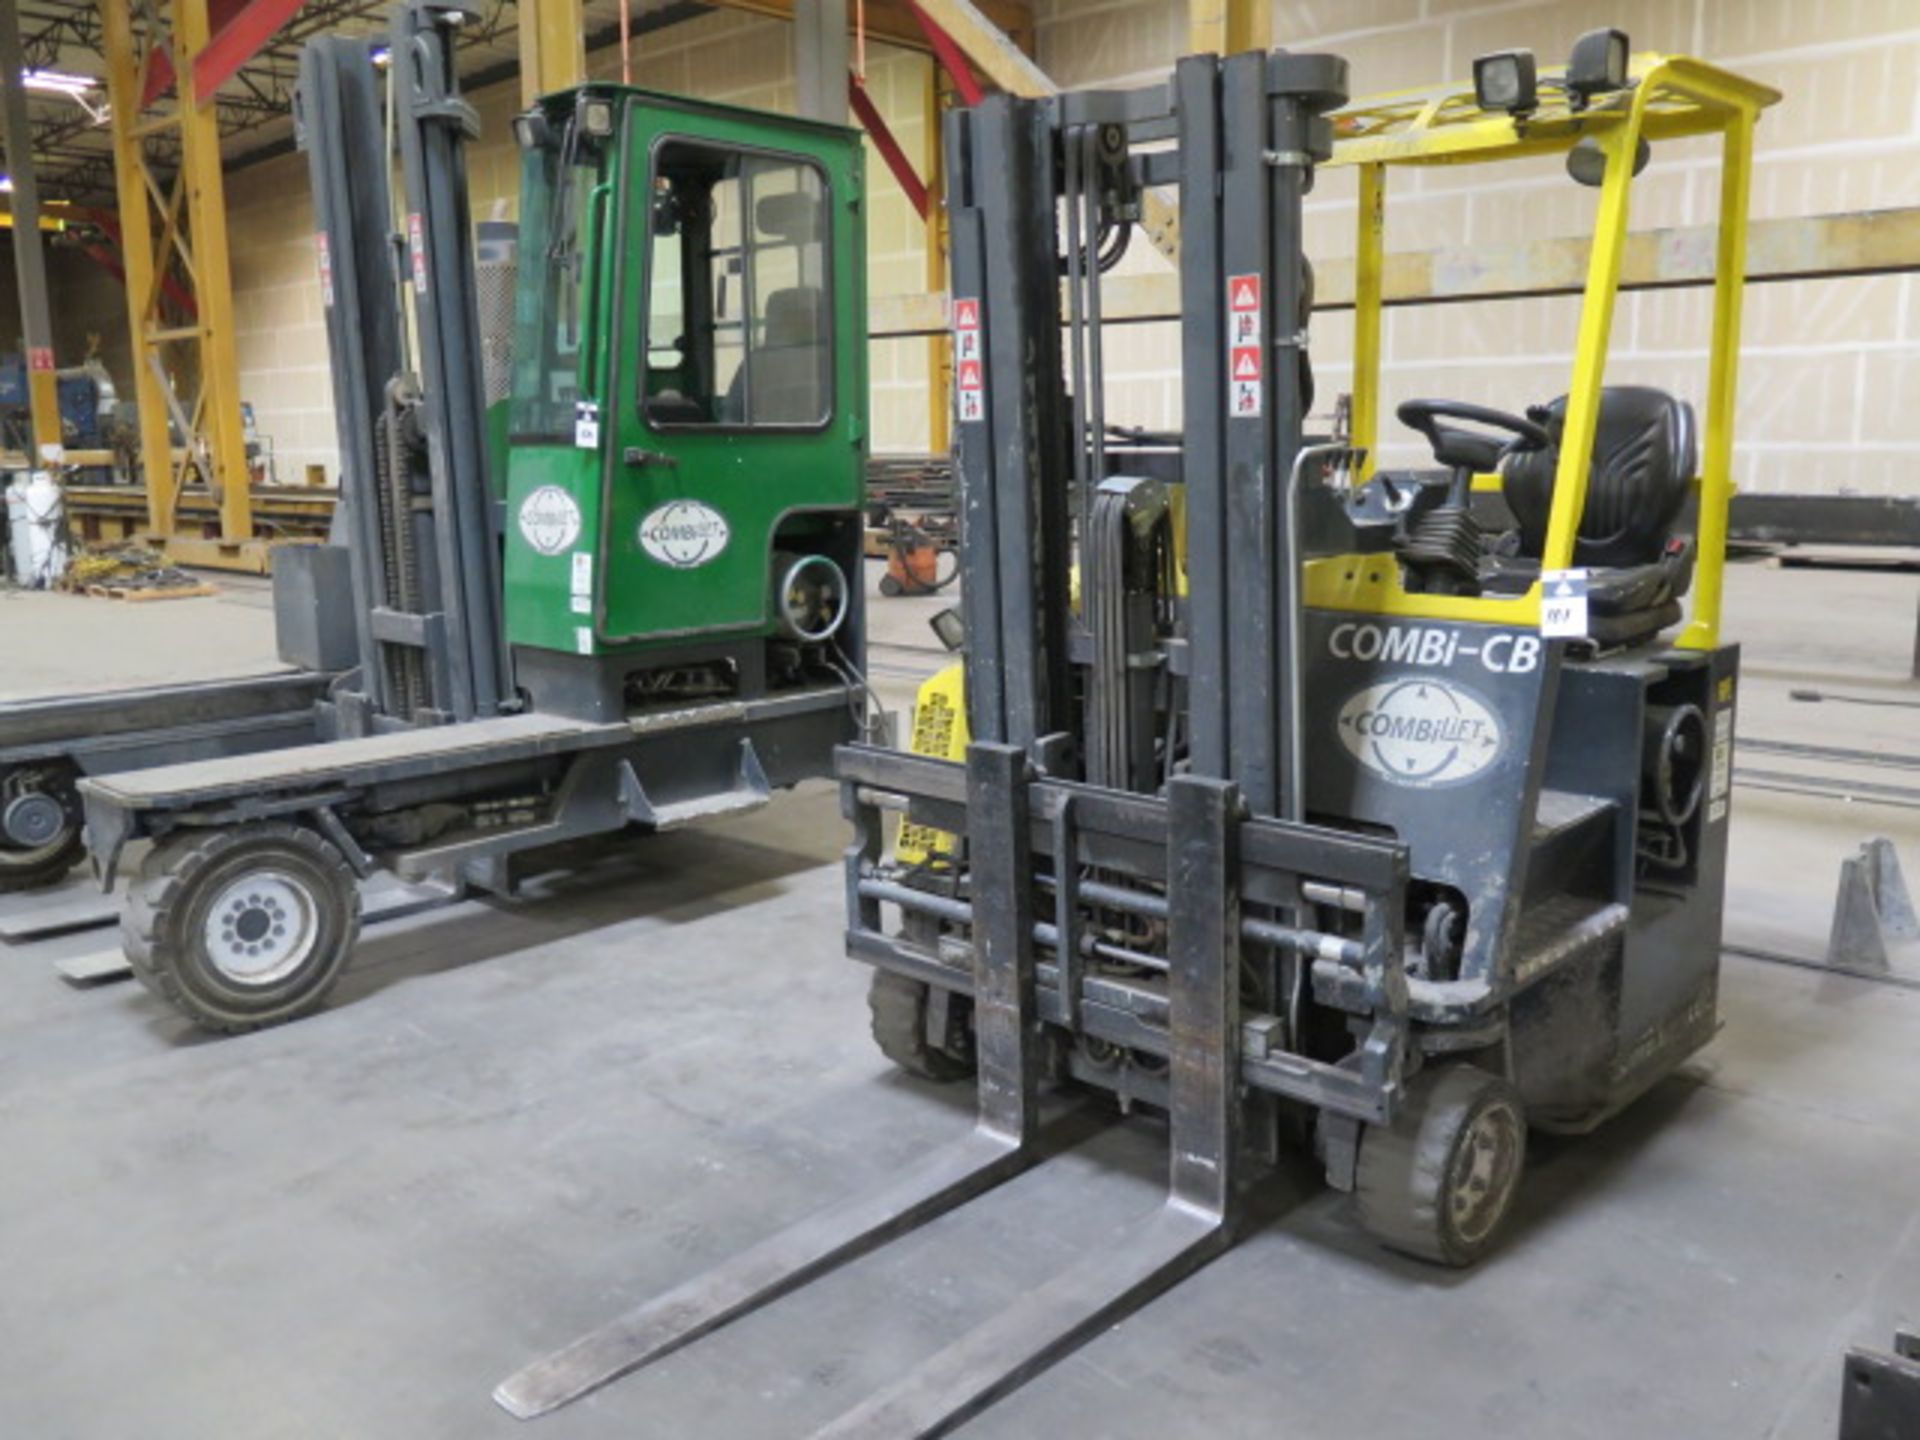 2017 CombiLift C6000CB 6,000 Lb Cap LPG Comb Forklift s/n 34957 w/ Multi-Directional, SOLD AS IS - Image 3 of 17